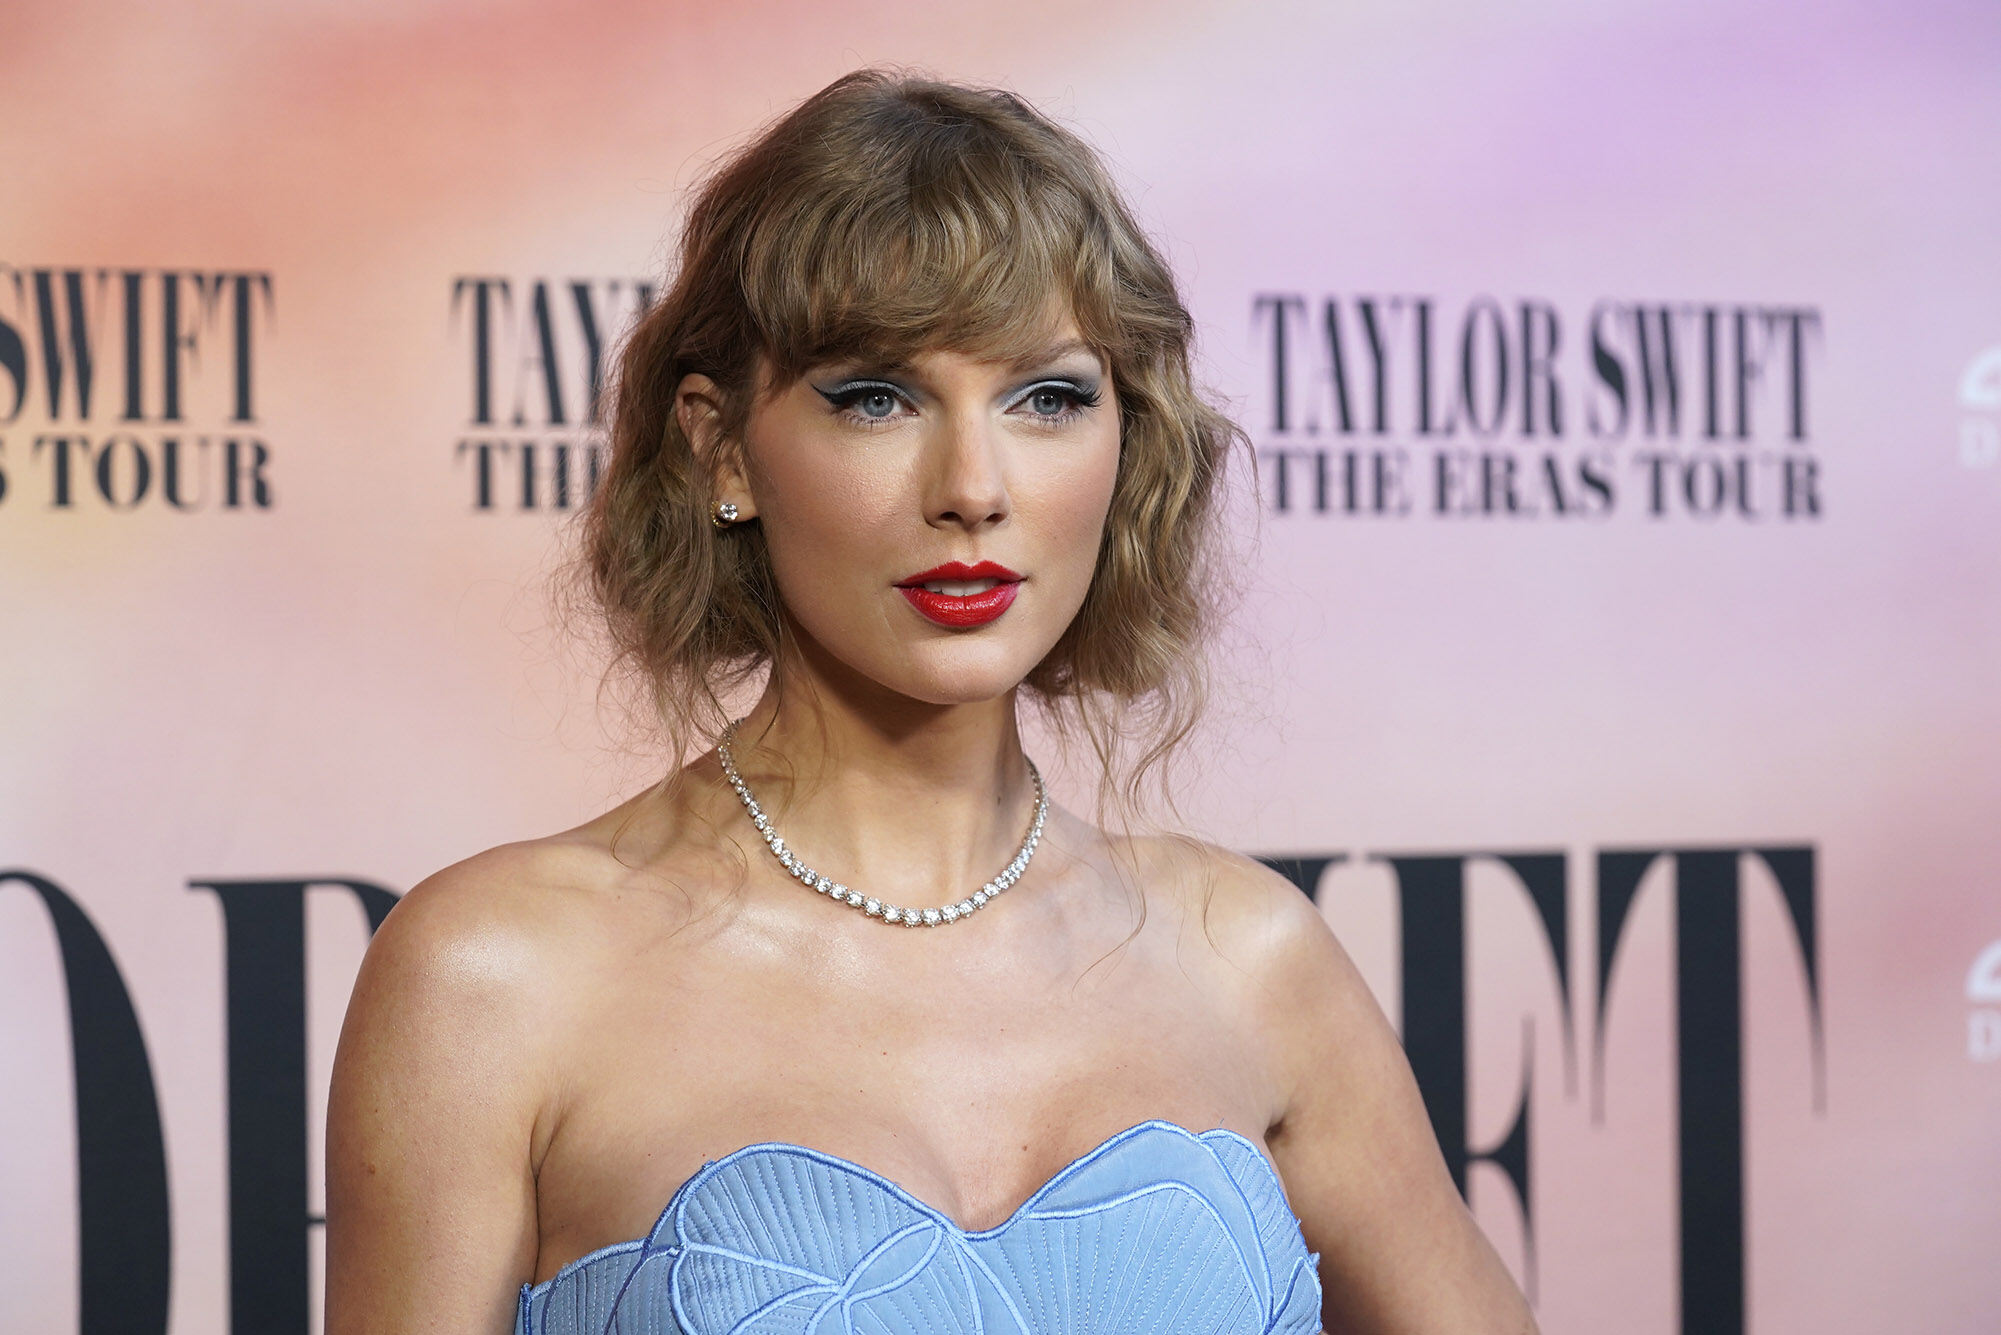 Taylor Swift’s Onstage Cough Sparks Concern Among Fans In Singapore